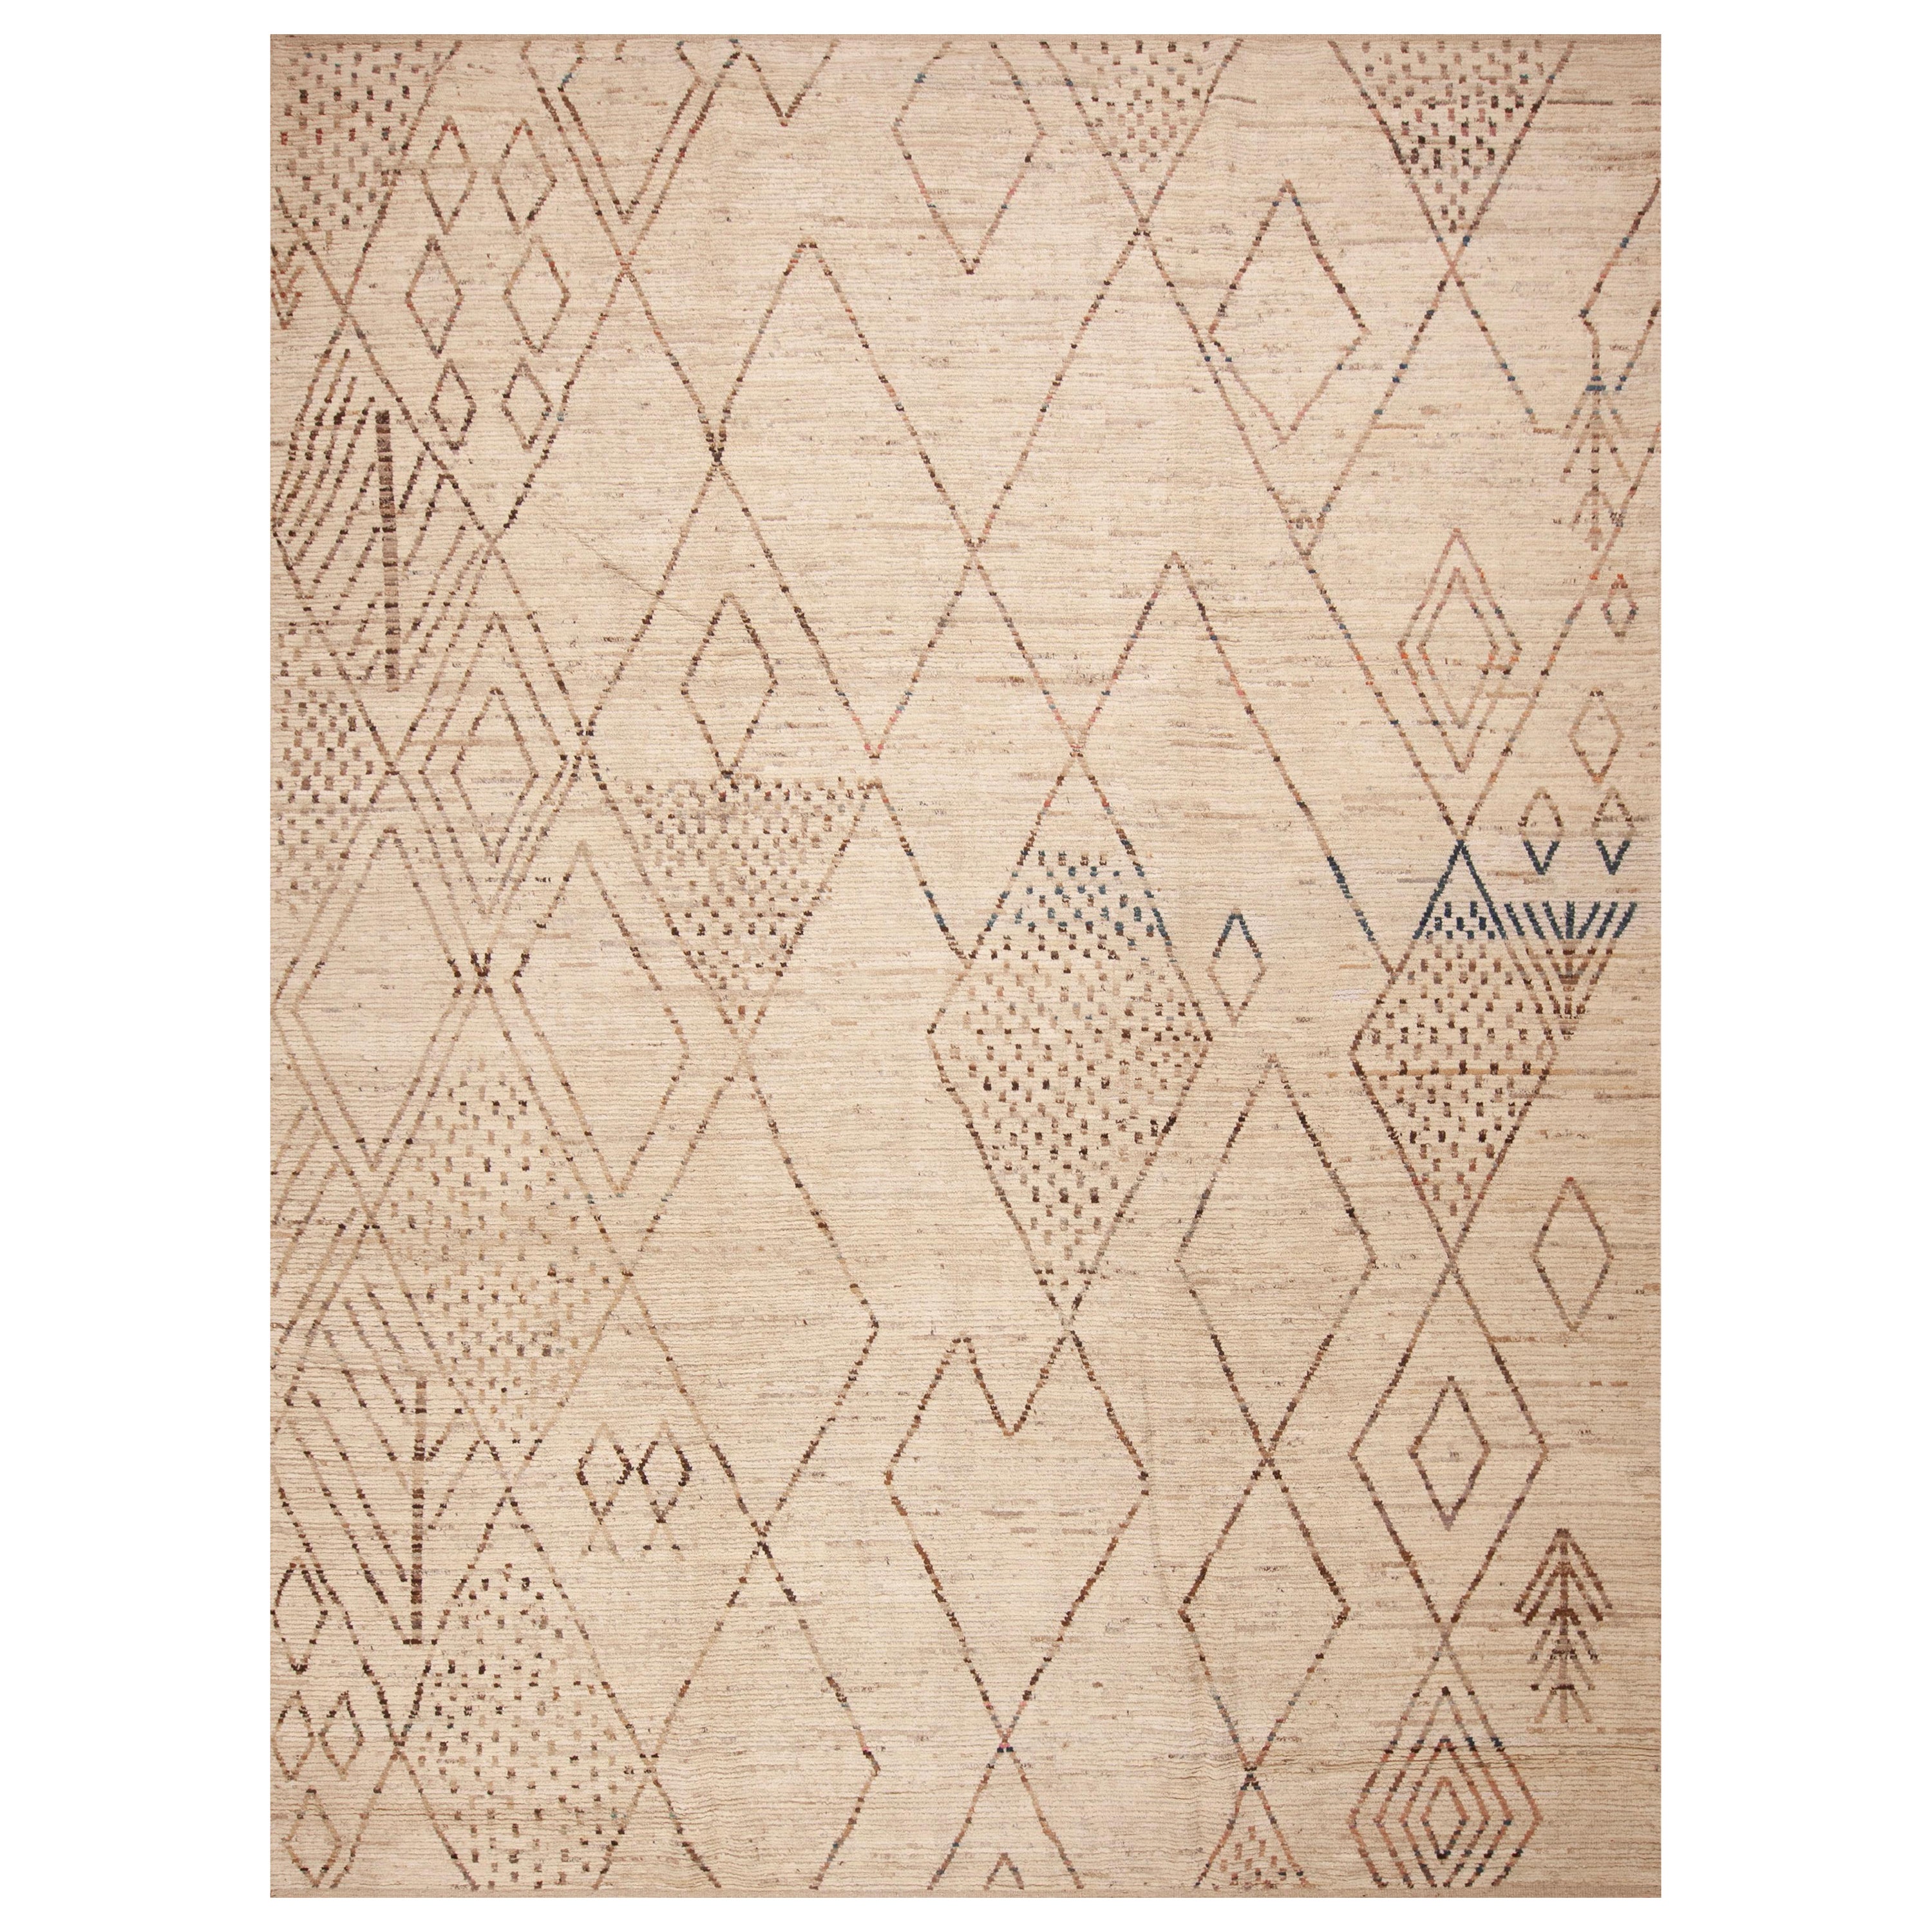 Nazmiyal Collection Tribal Beni Ourain Design Pattern Modern Rug 10'4" x 13'9" For Sale